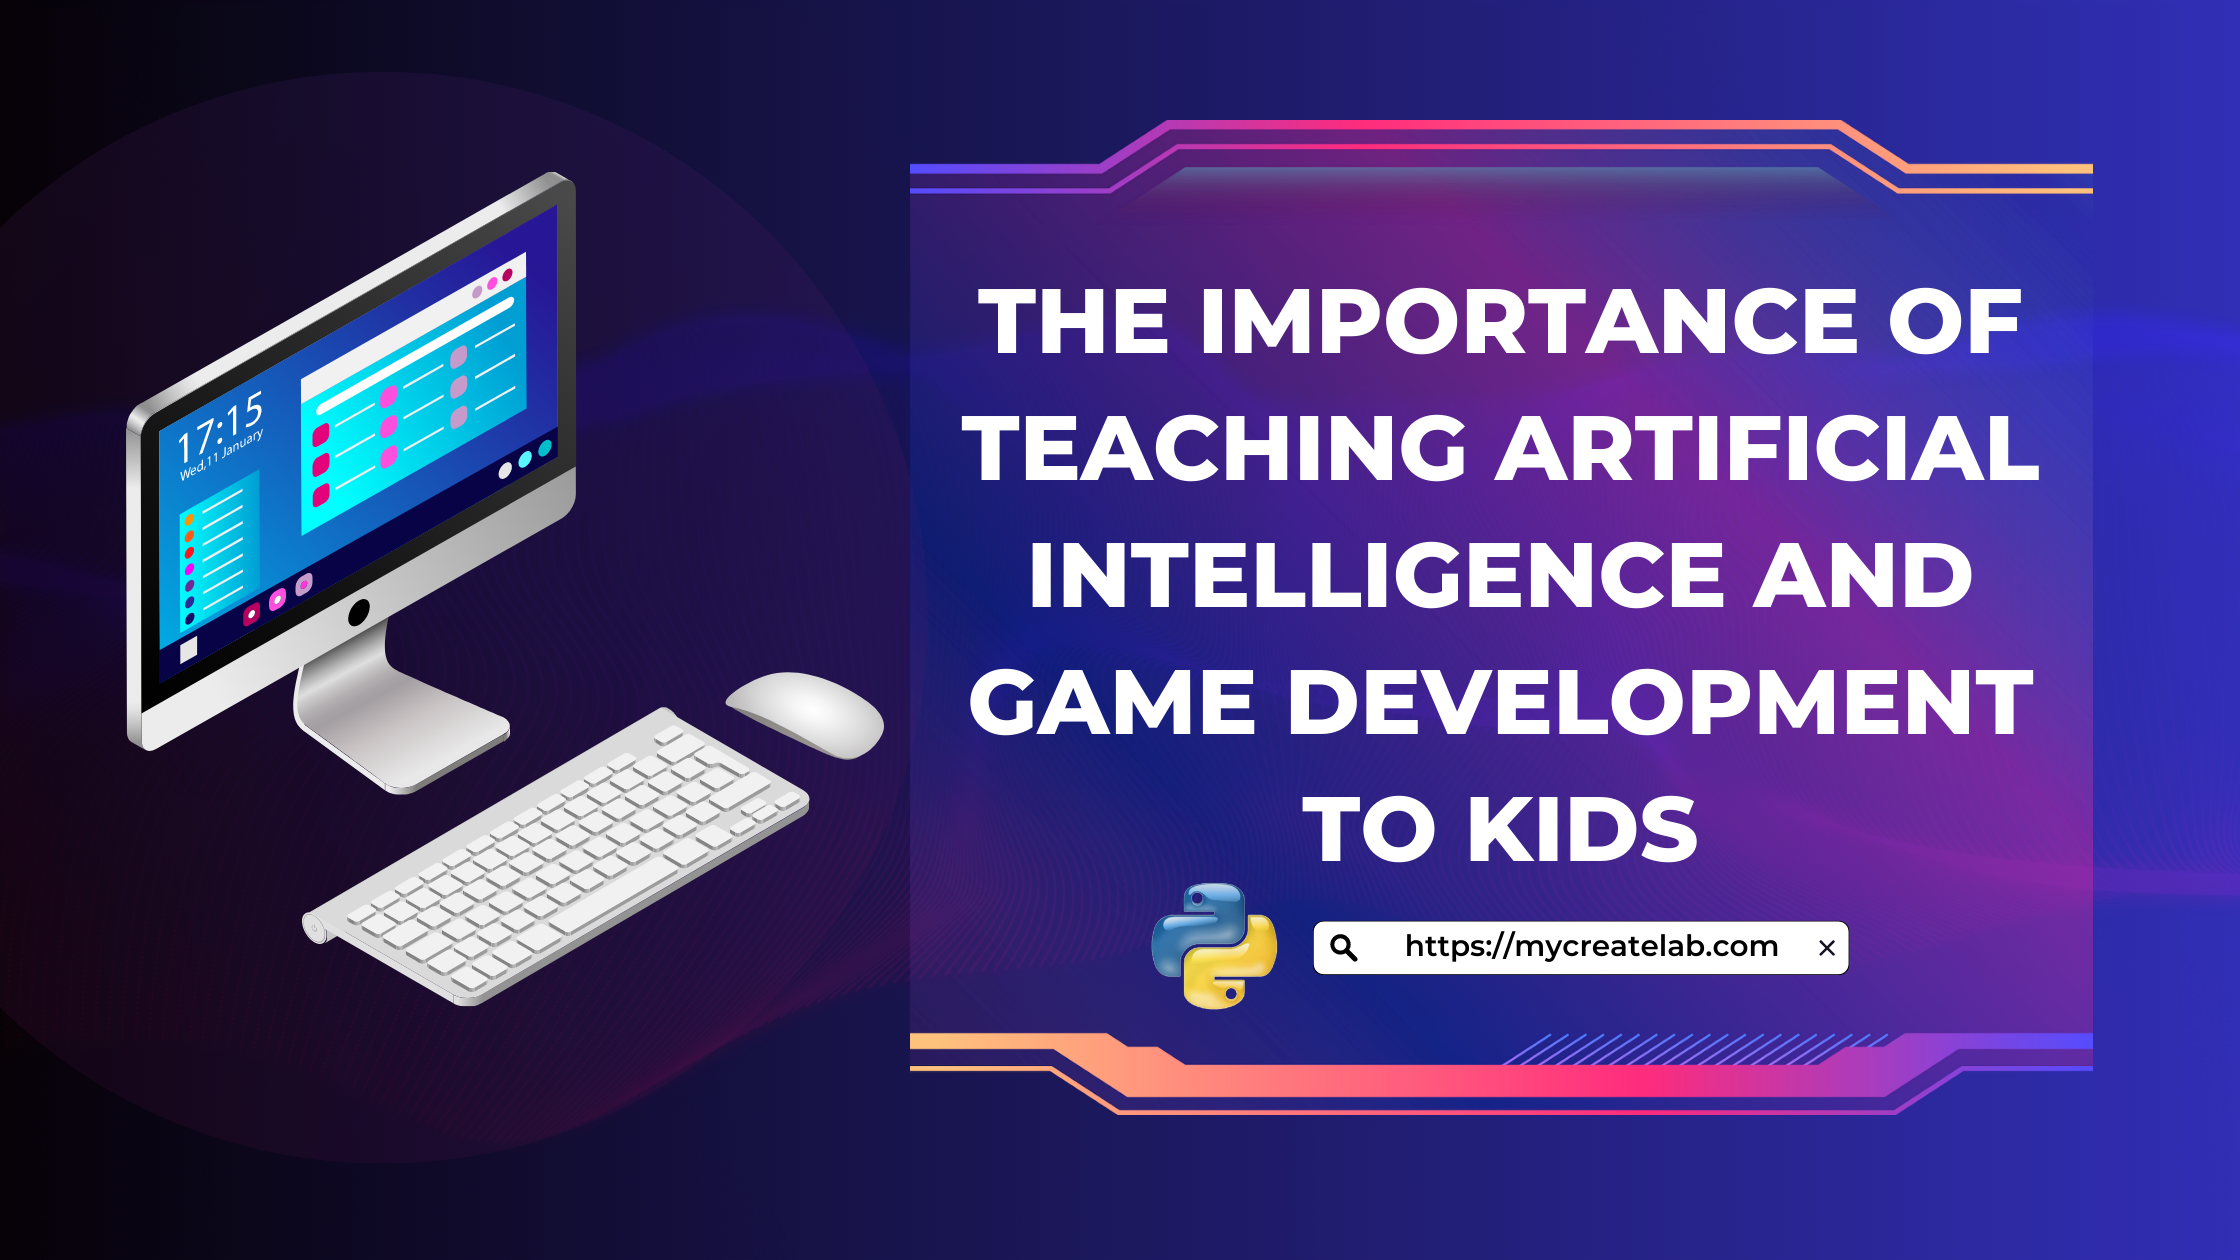 The Importance of Teaching Artificial Intelligence and Game Development to Kids